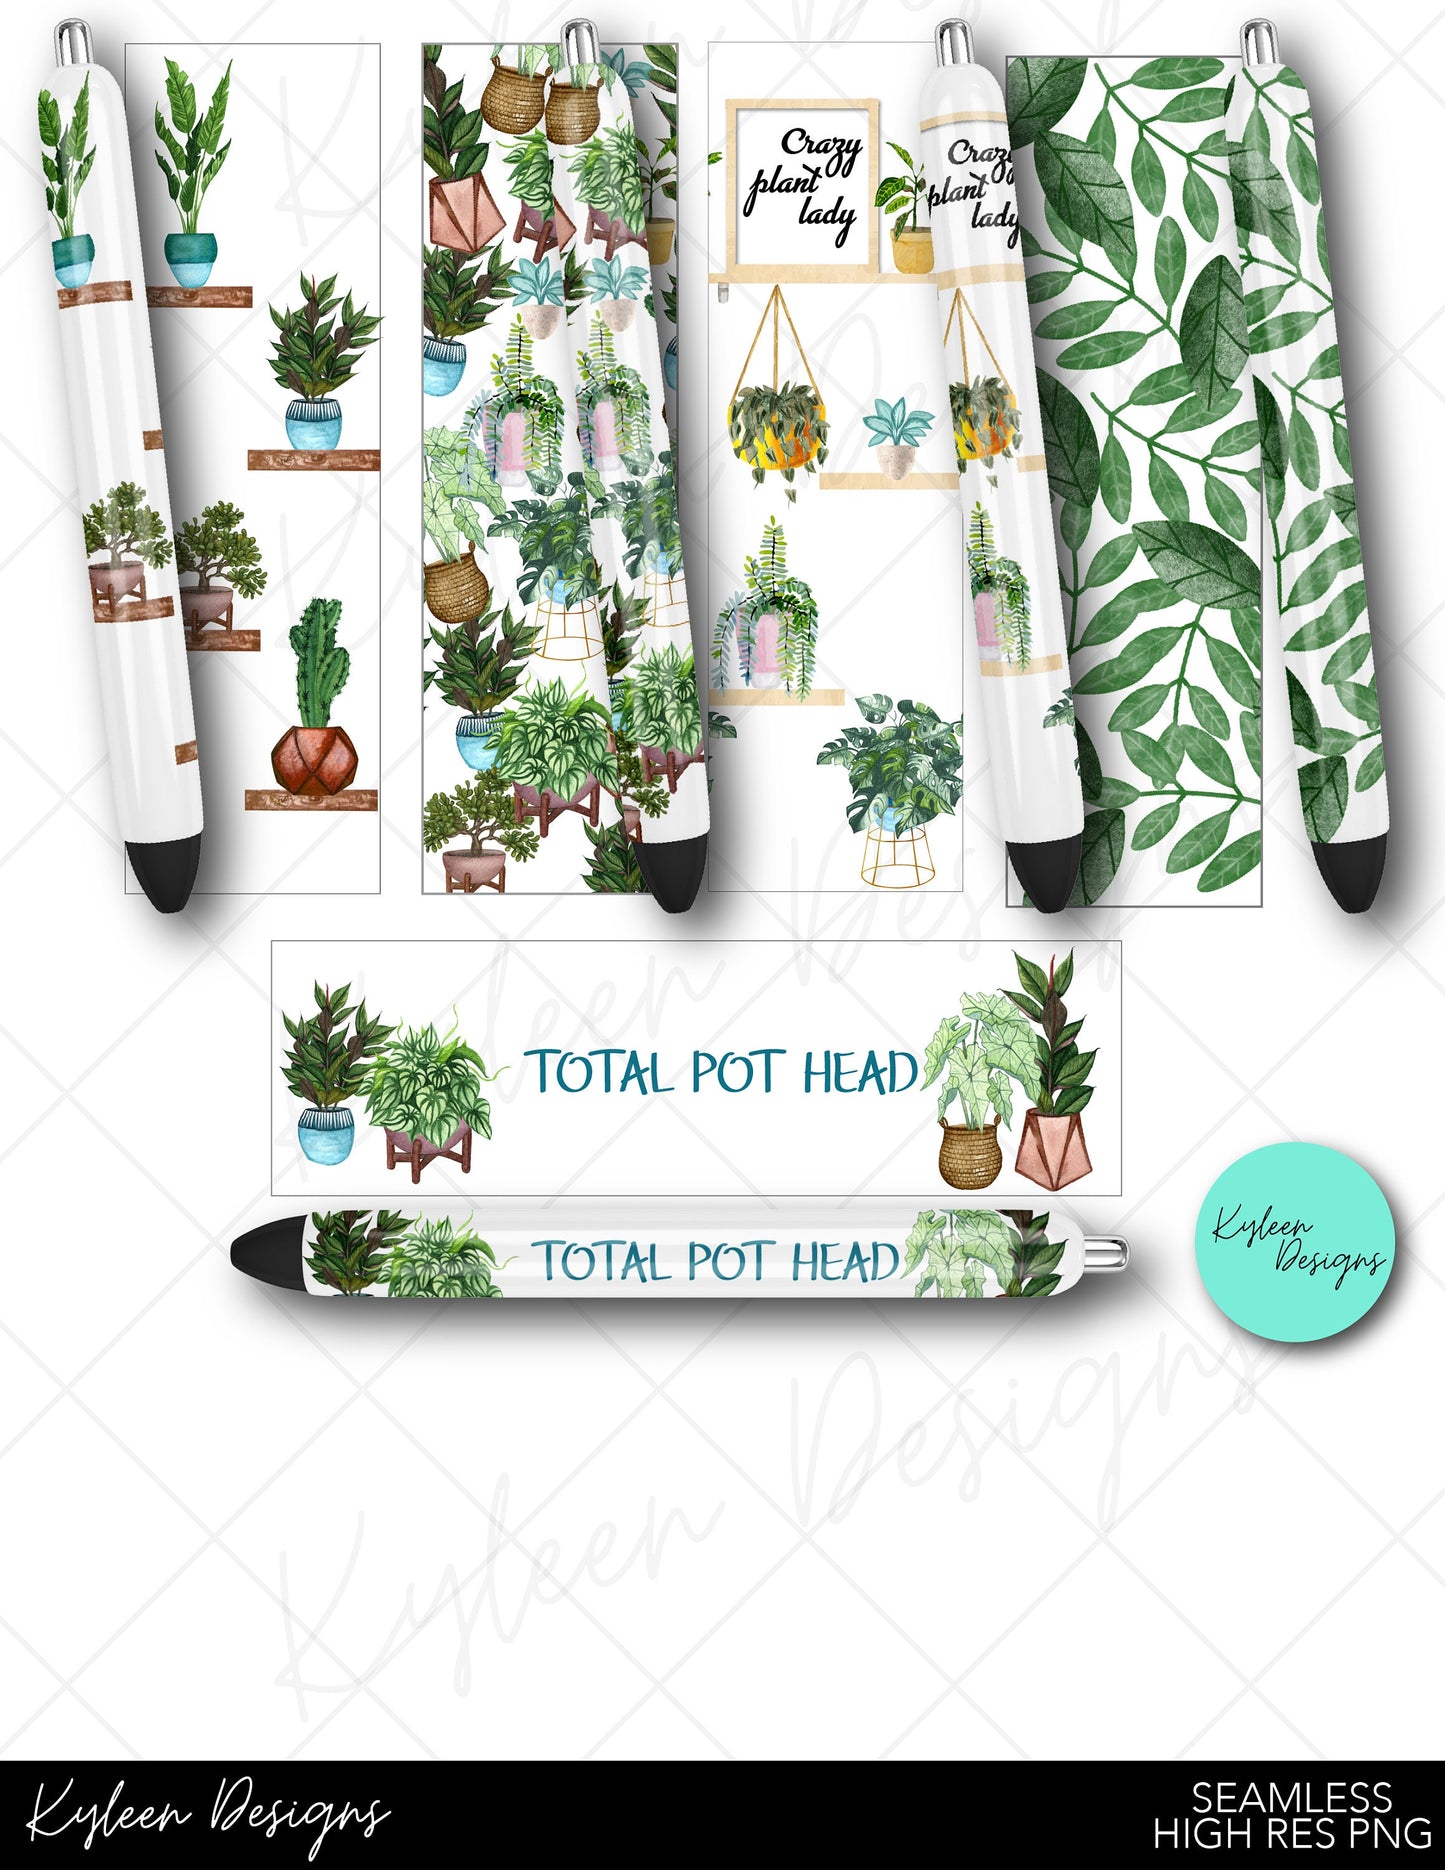 SEAMLESS crazy plant lady pot head pen wraps for waterslide high RES PNG